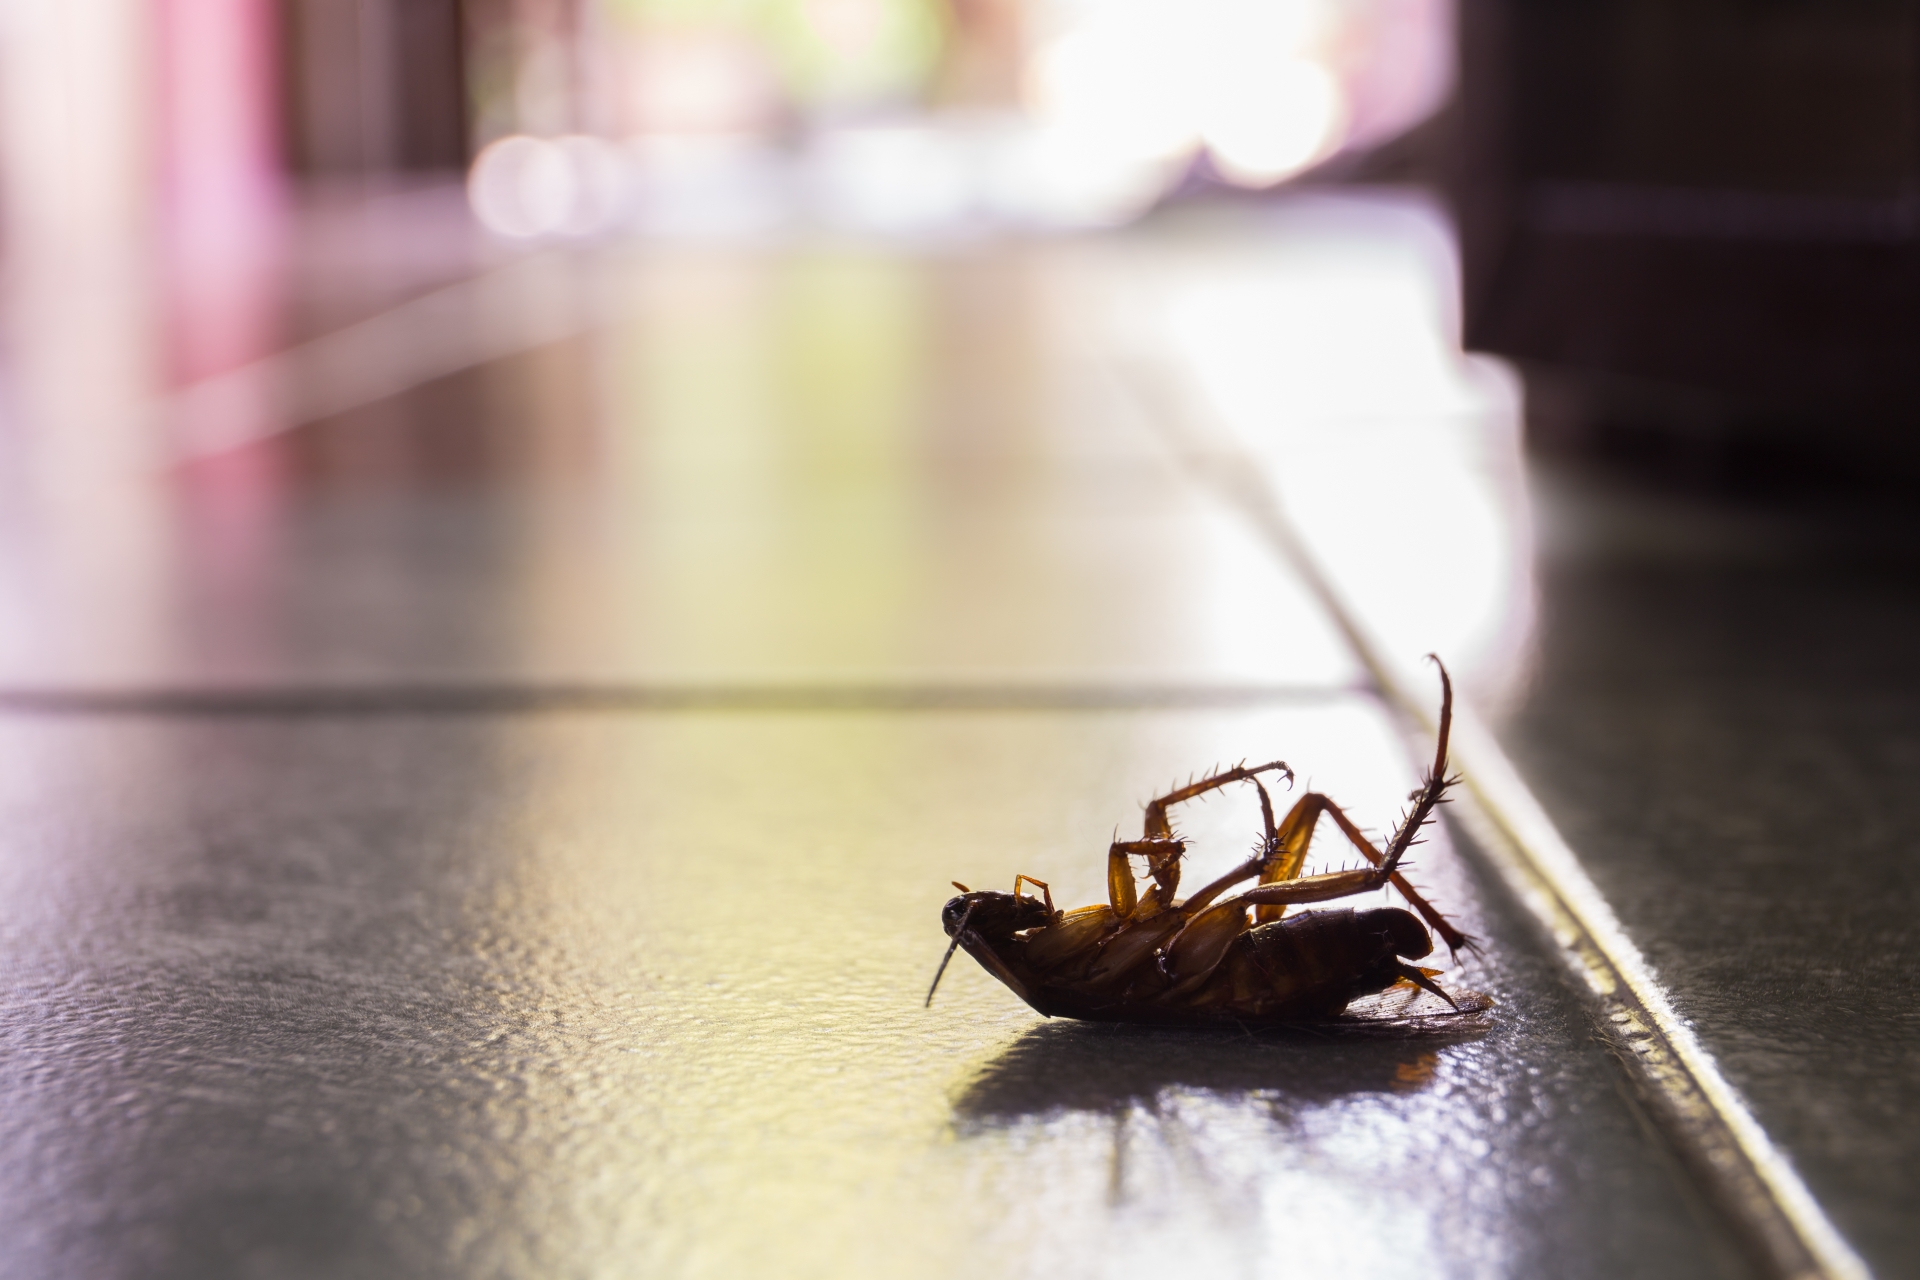 Cockroach Control, Pest Control in Brixton, SW2. Call Now 020 8166 9746